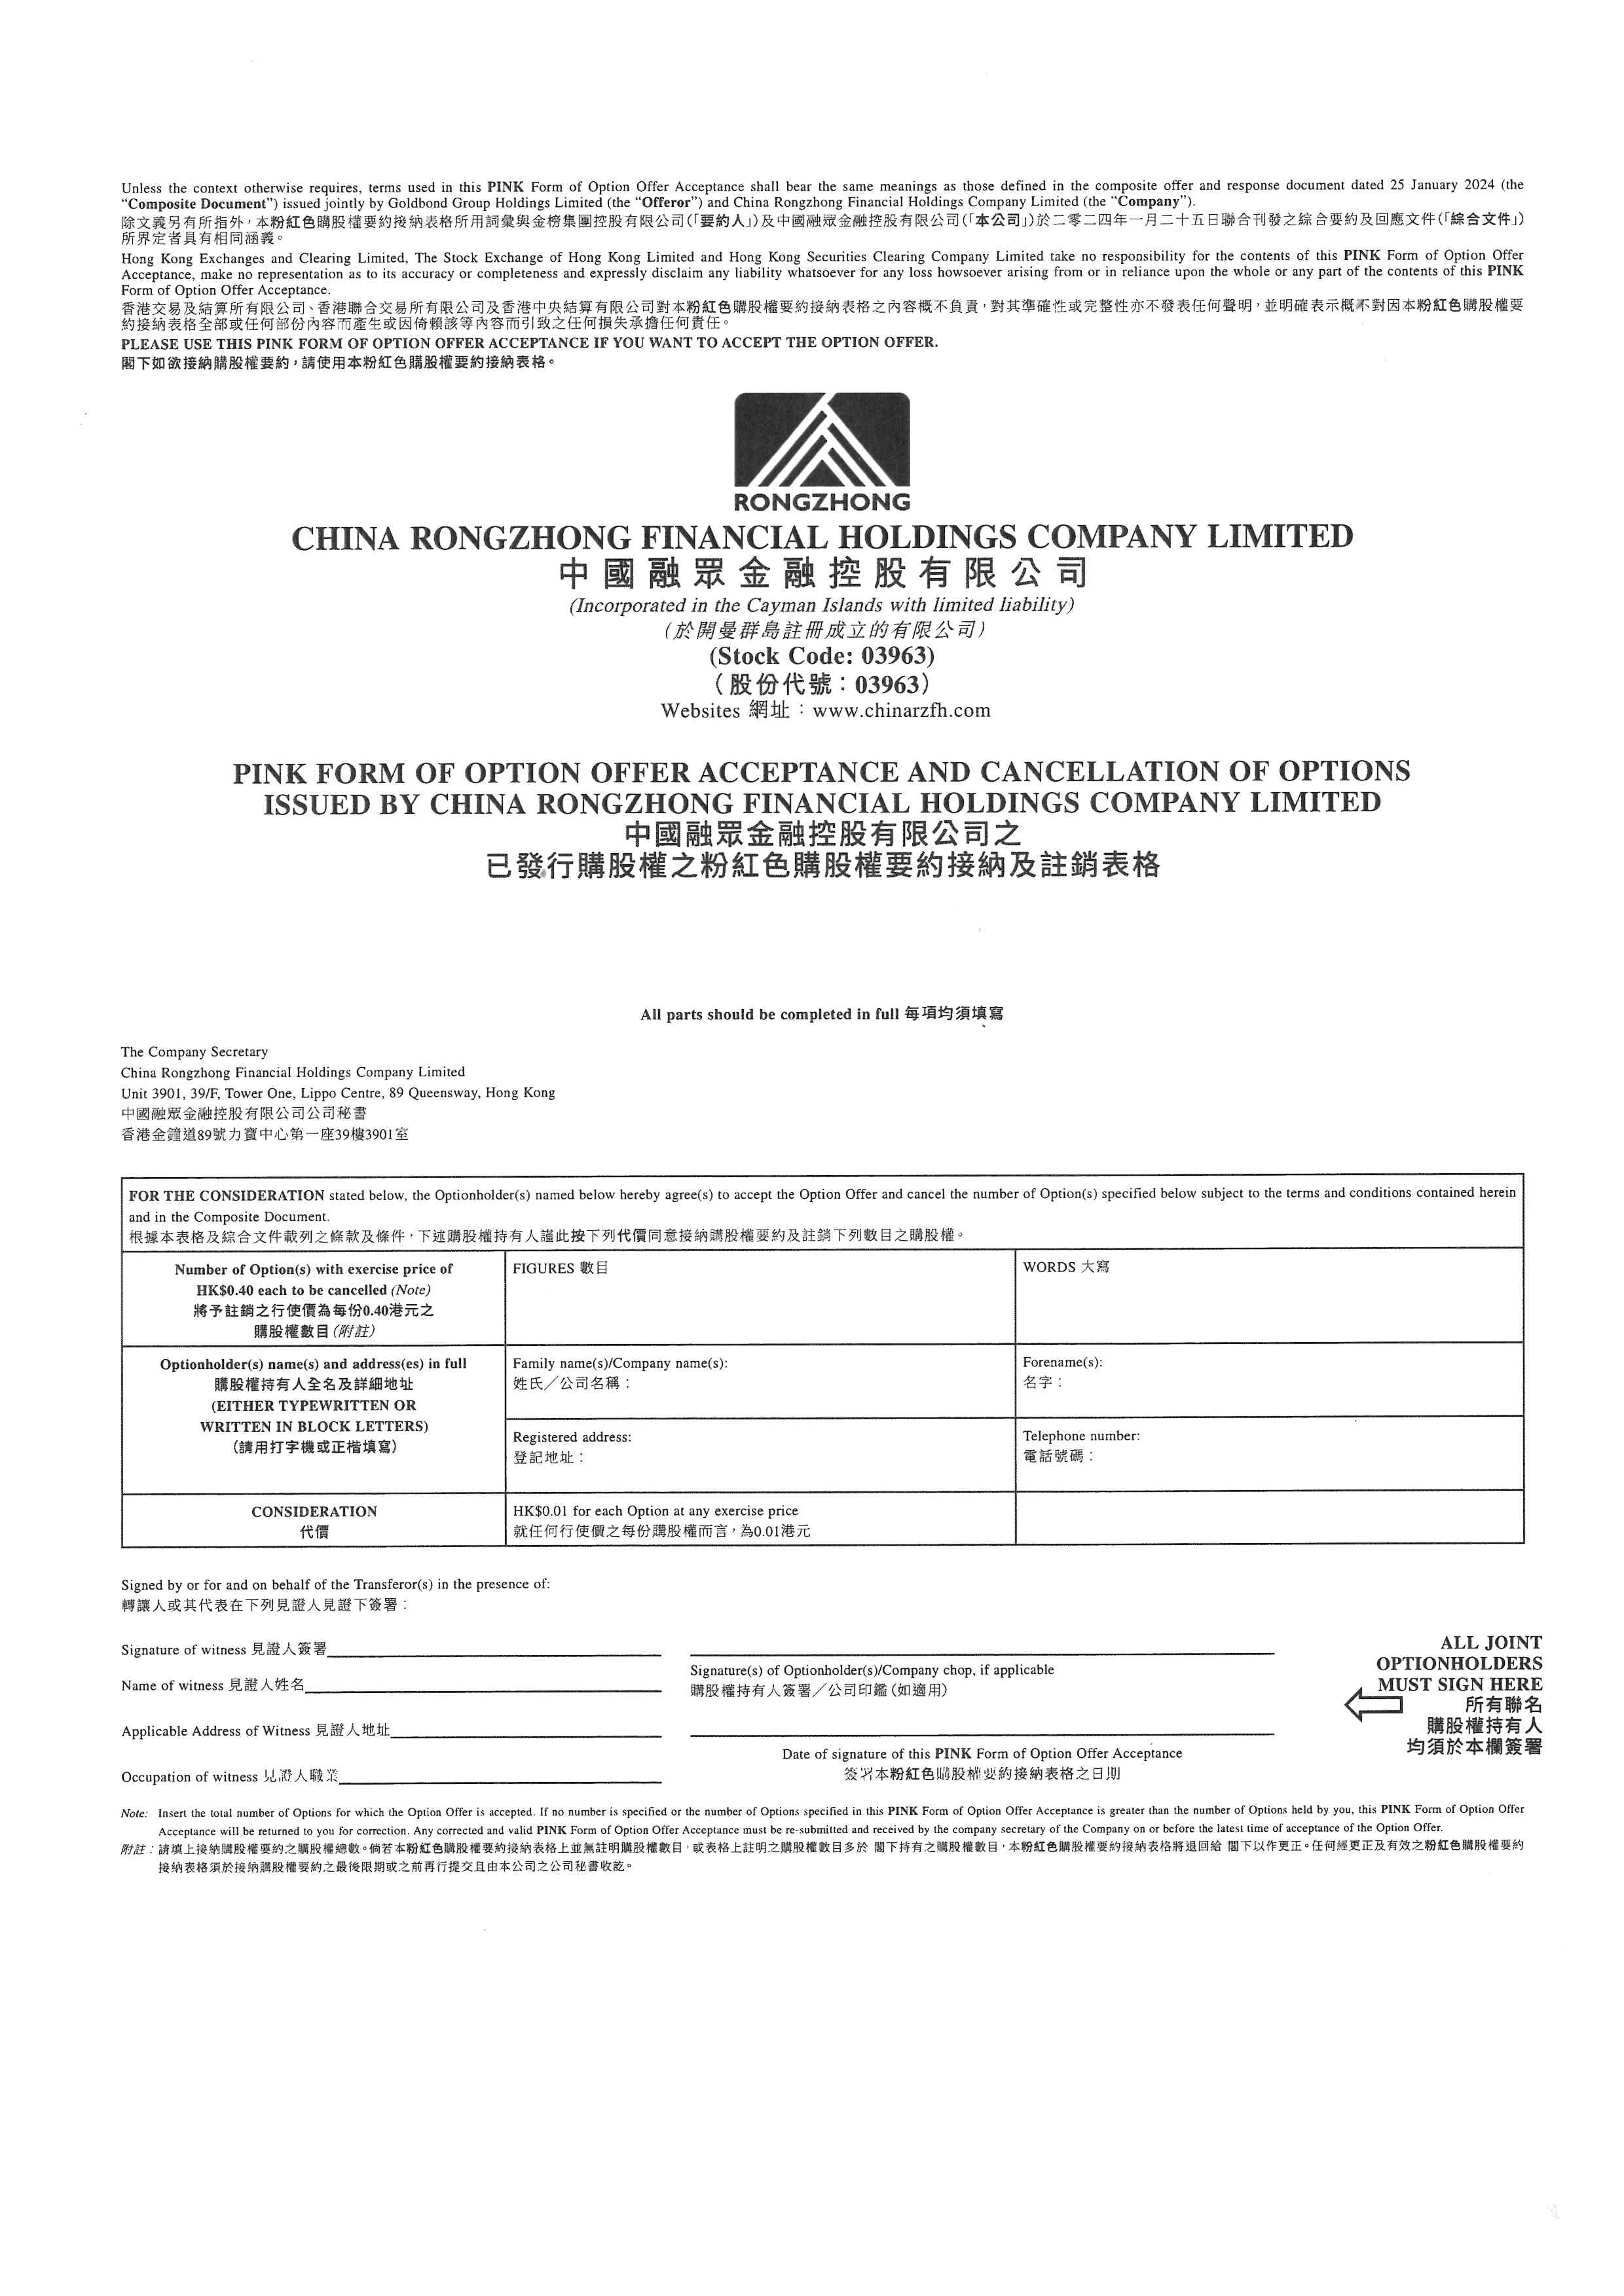 Circulars - [Document issued by Offeree Company under the Takeovers Code / Document issued by Offeror Company under